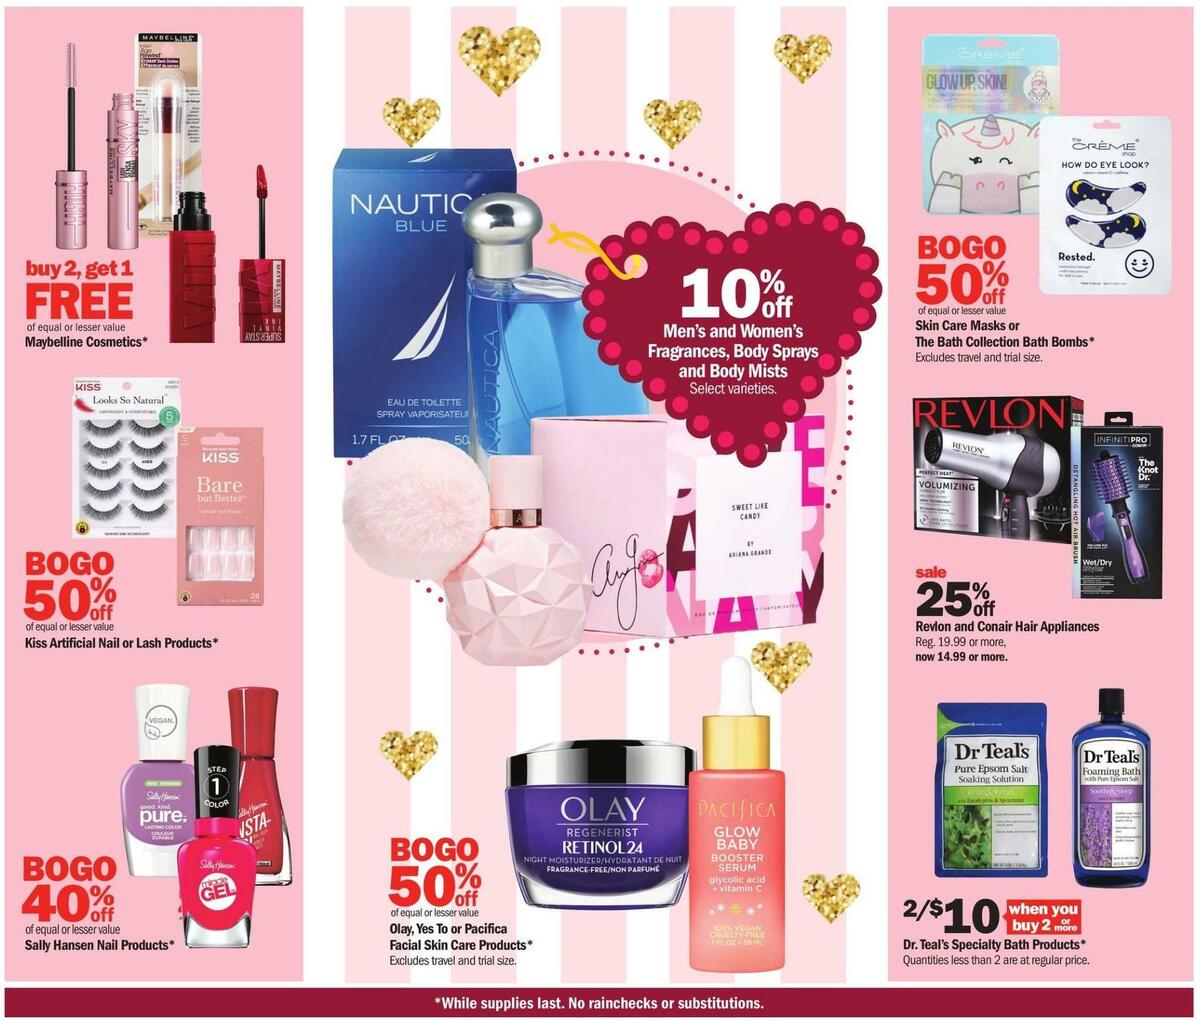 Meijer Valentine's Day Weekly Ad from February 5